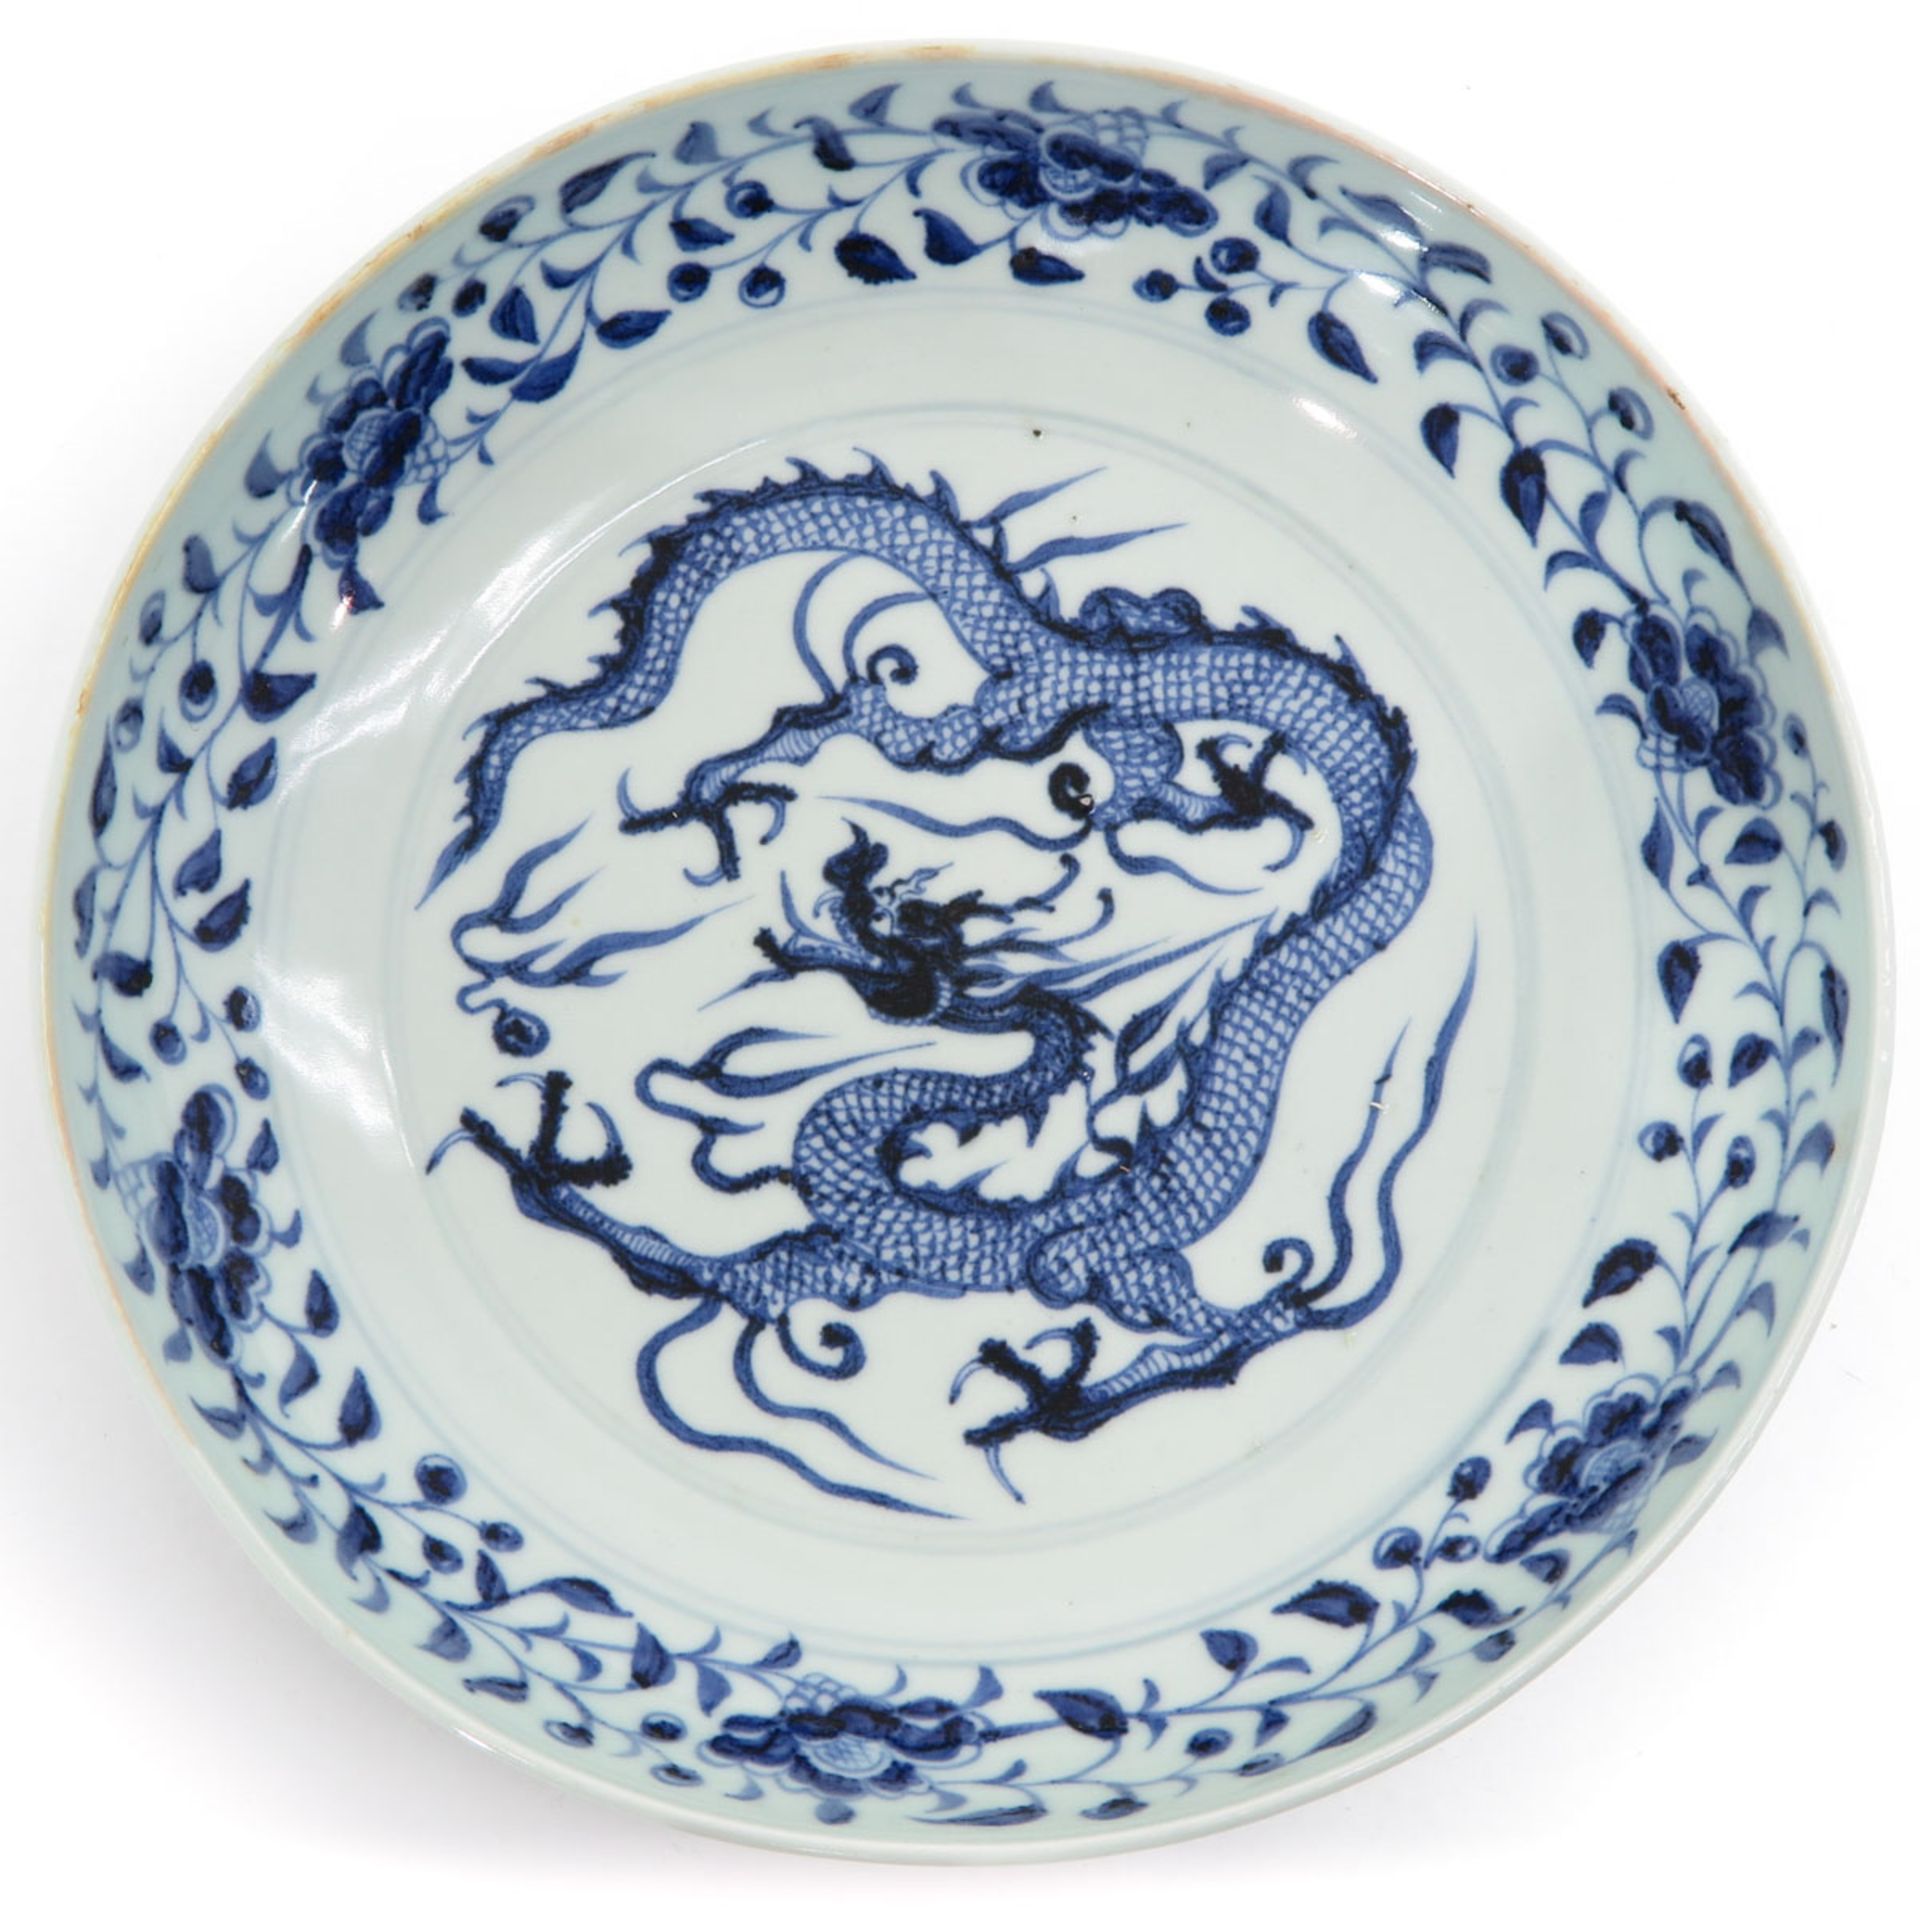 A Blue and White Dragon Plate